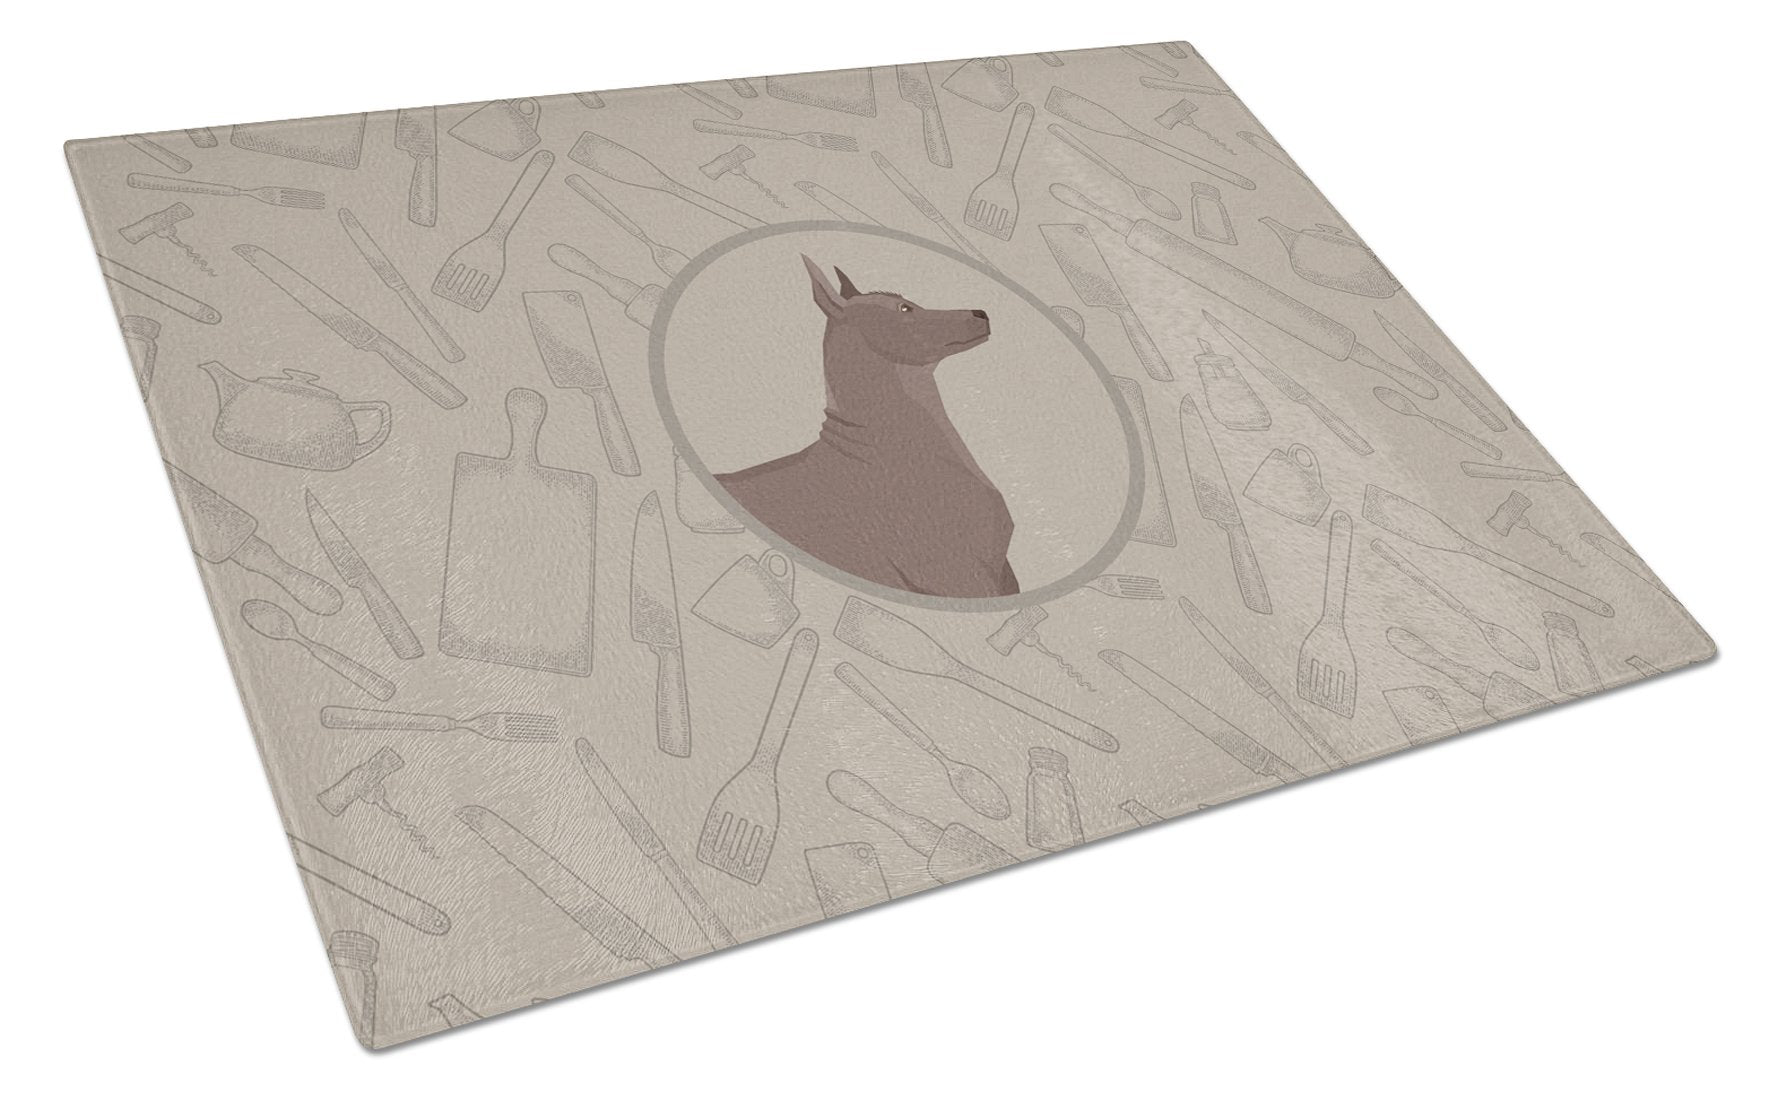 Mexican Hairless Dog Xolo In the Kitchen Glass Cutting Board Large CK2217LCB by Caroline's Treasures